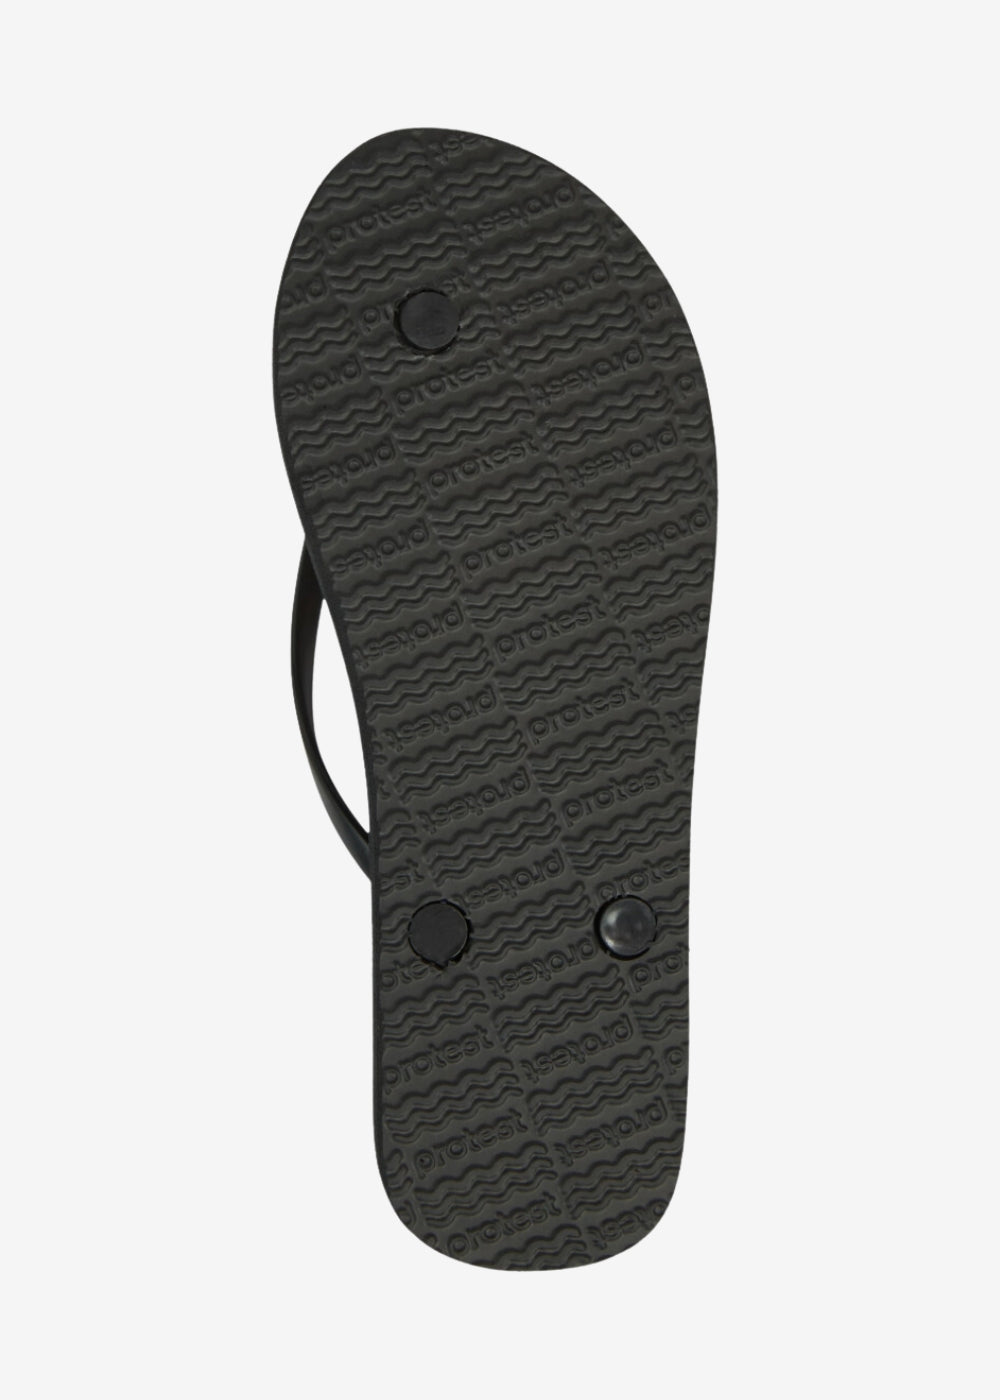 Load image into Gallery viewer, Prttoucan Flip flops by Protest
